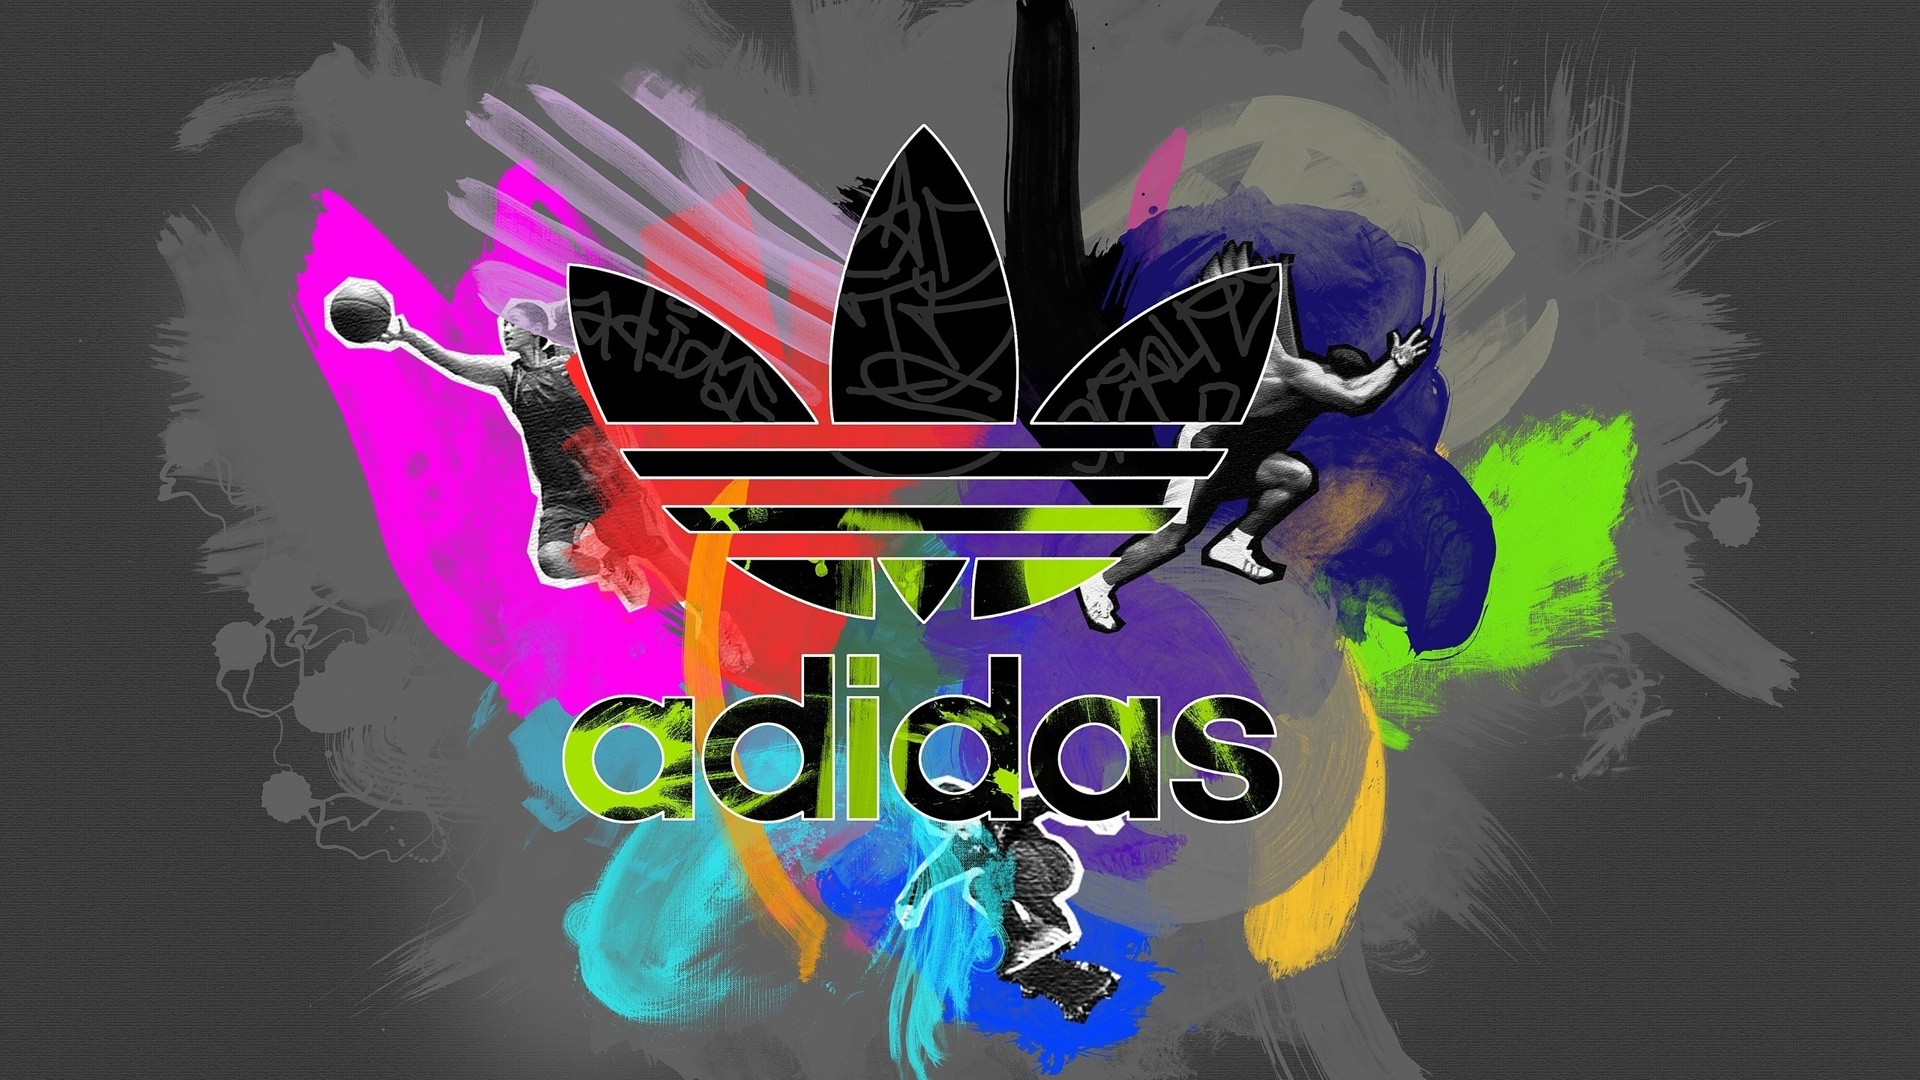 Free Download Adidas Logo Wallpaper Hd Wallpapers 19x1080 For Your Desktop Mobile Tablet Explore 21 Adidas Logo 3d Wallpaper Adidas Logo 3d Wallpaper Adidas Logo Wallpapers Logo Adidas Wallpaper